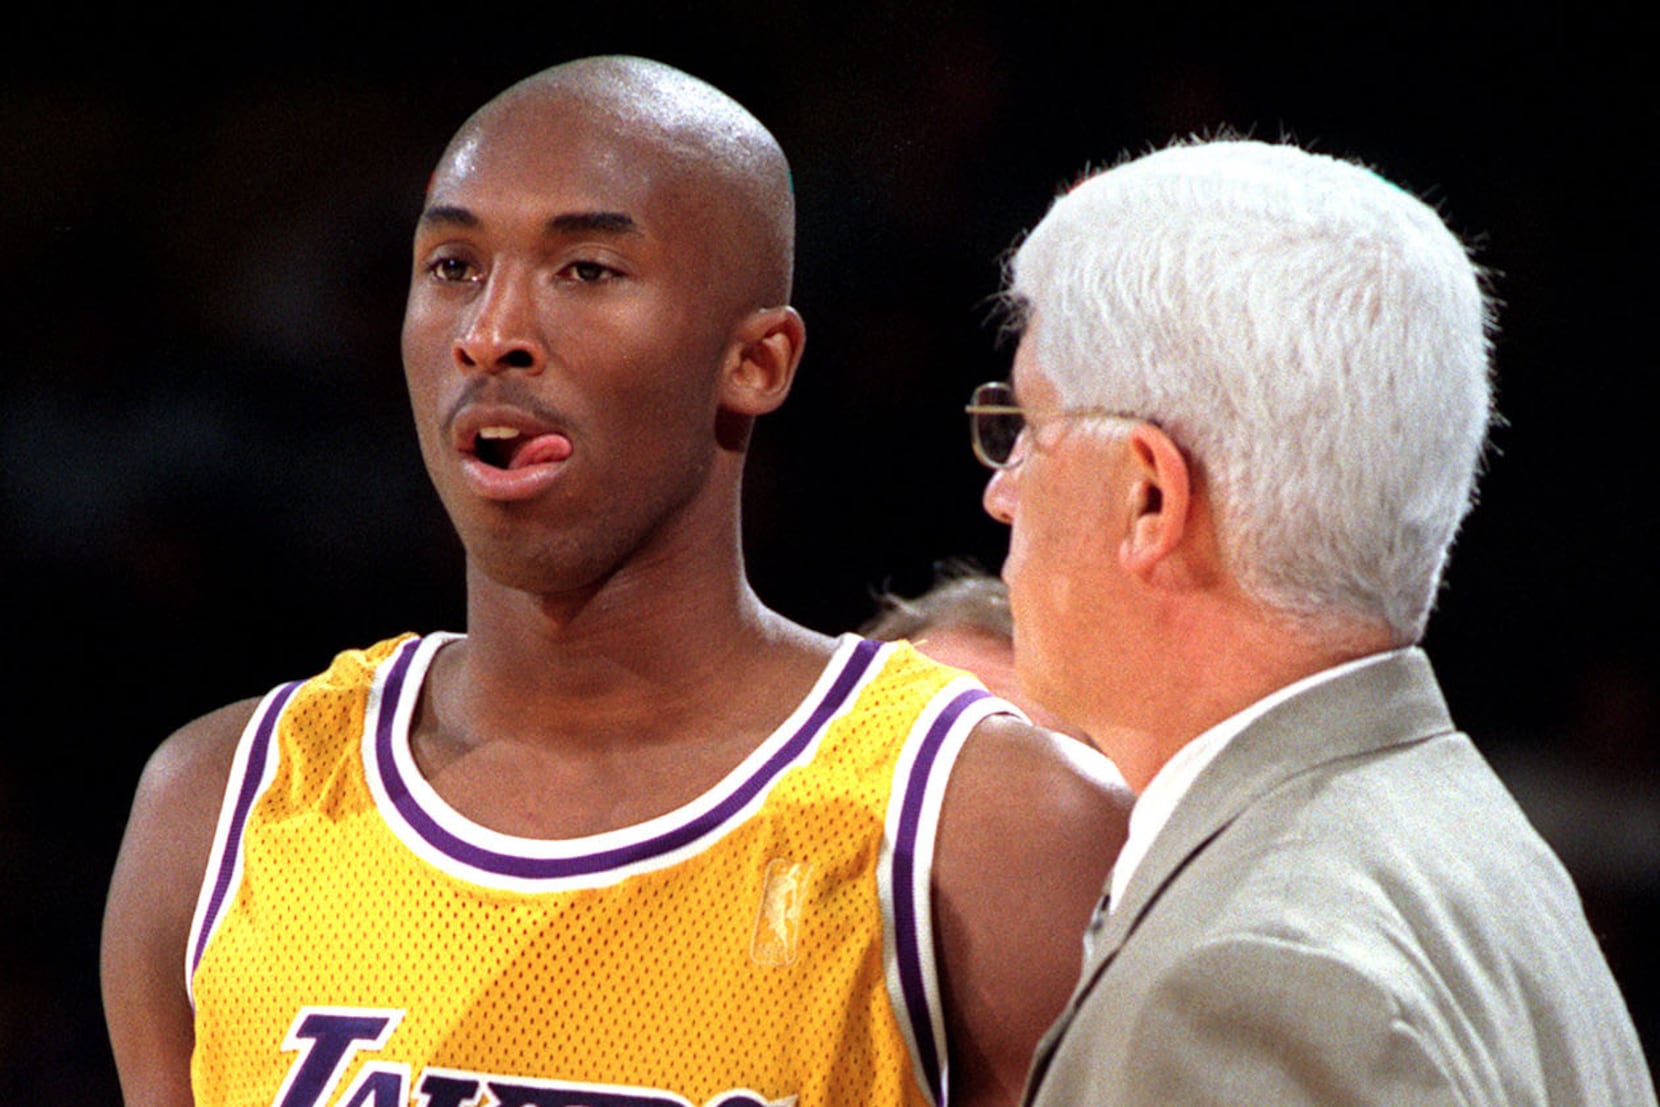 Trainer who worked with both Michael Jordan and Kobe Bryant once outlined  major difference between the two NBA legends